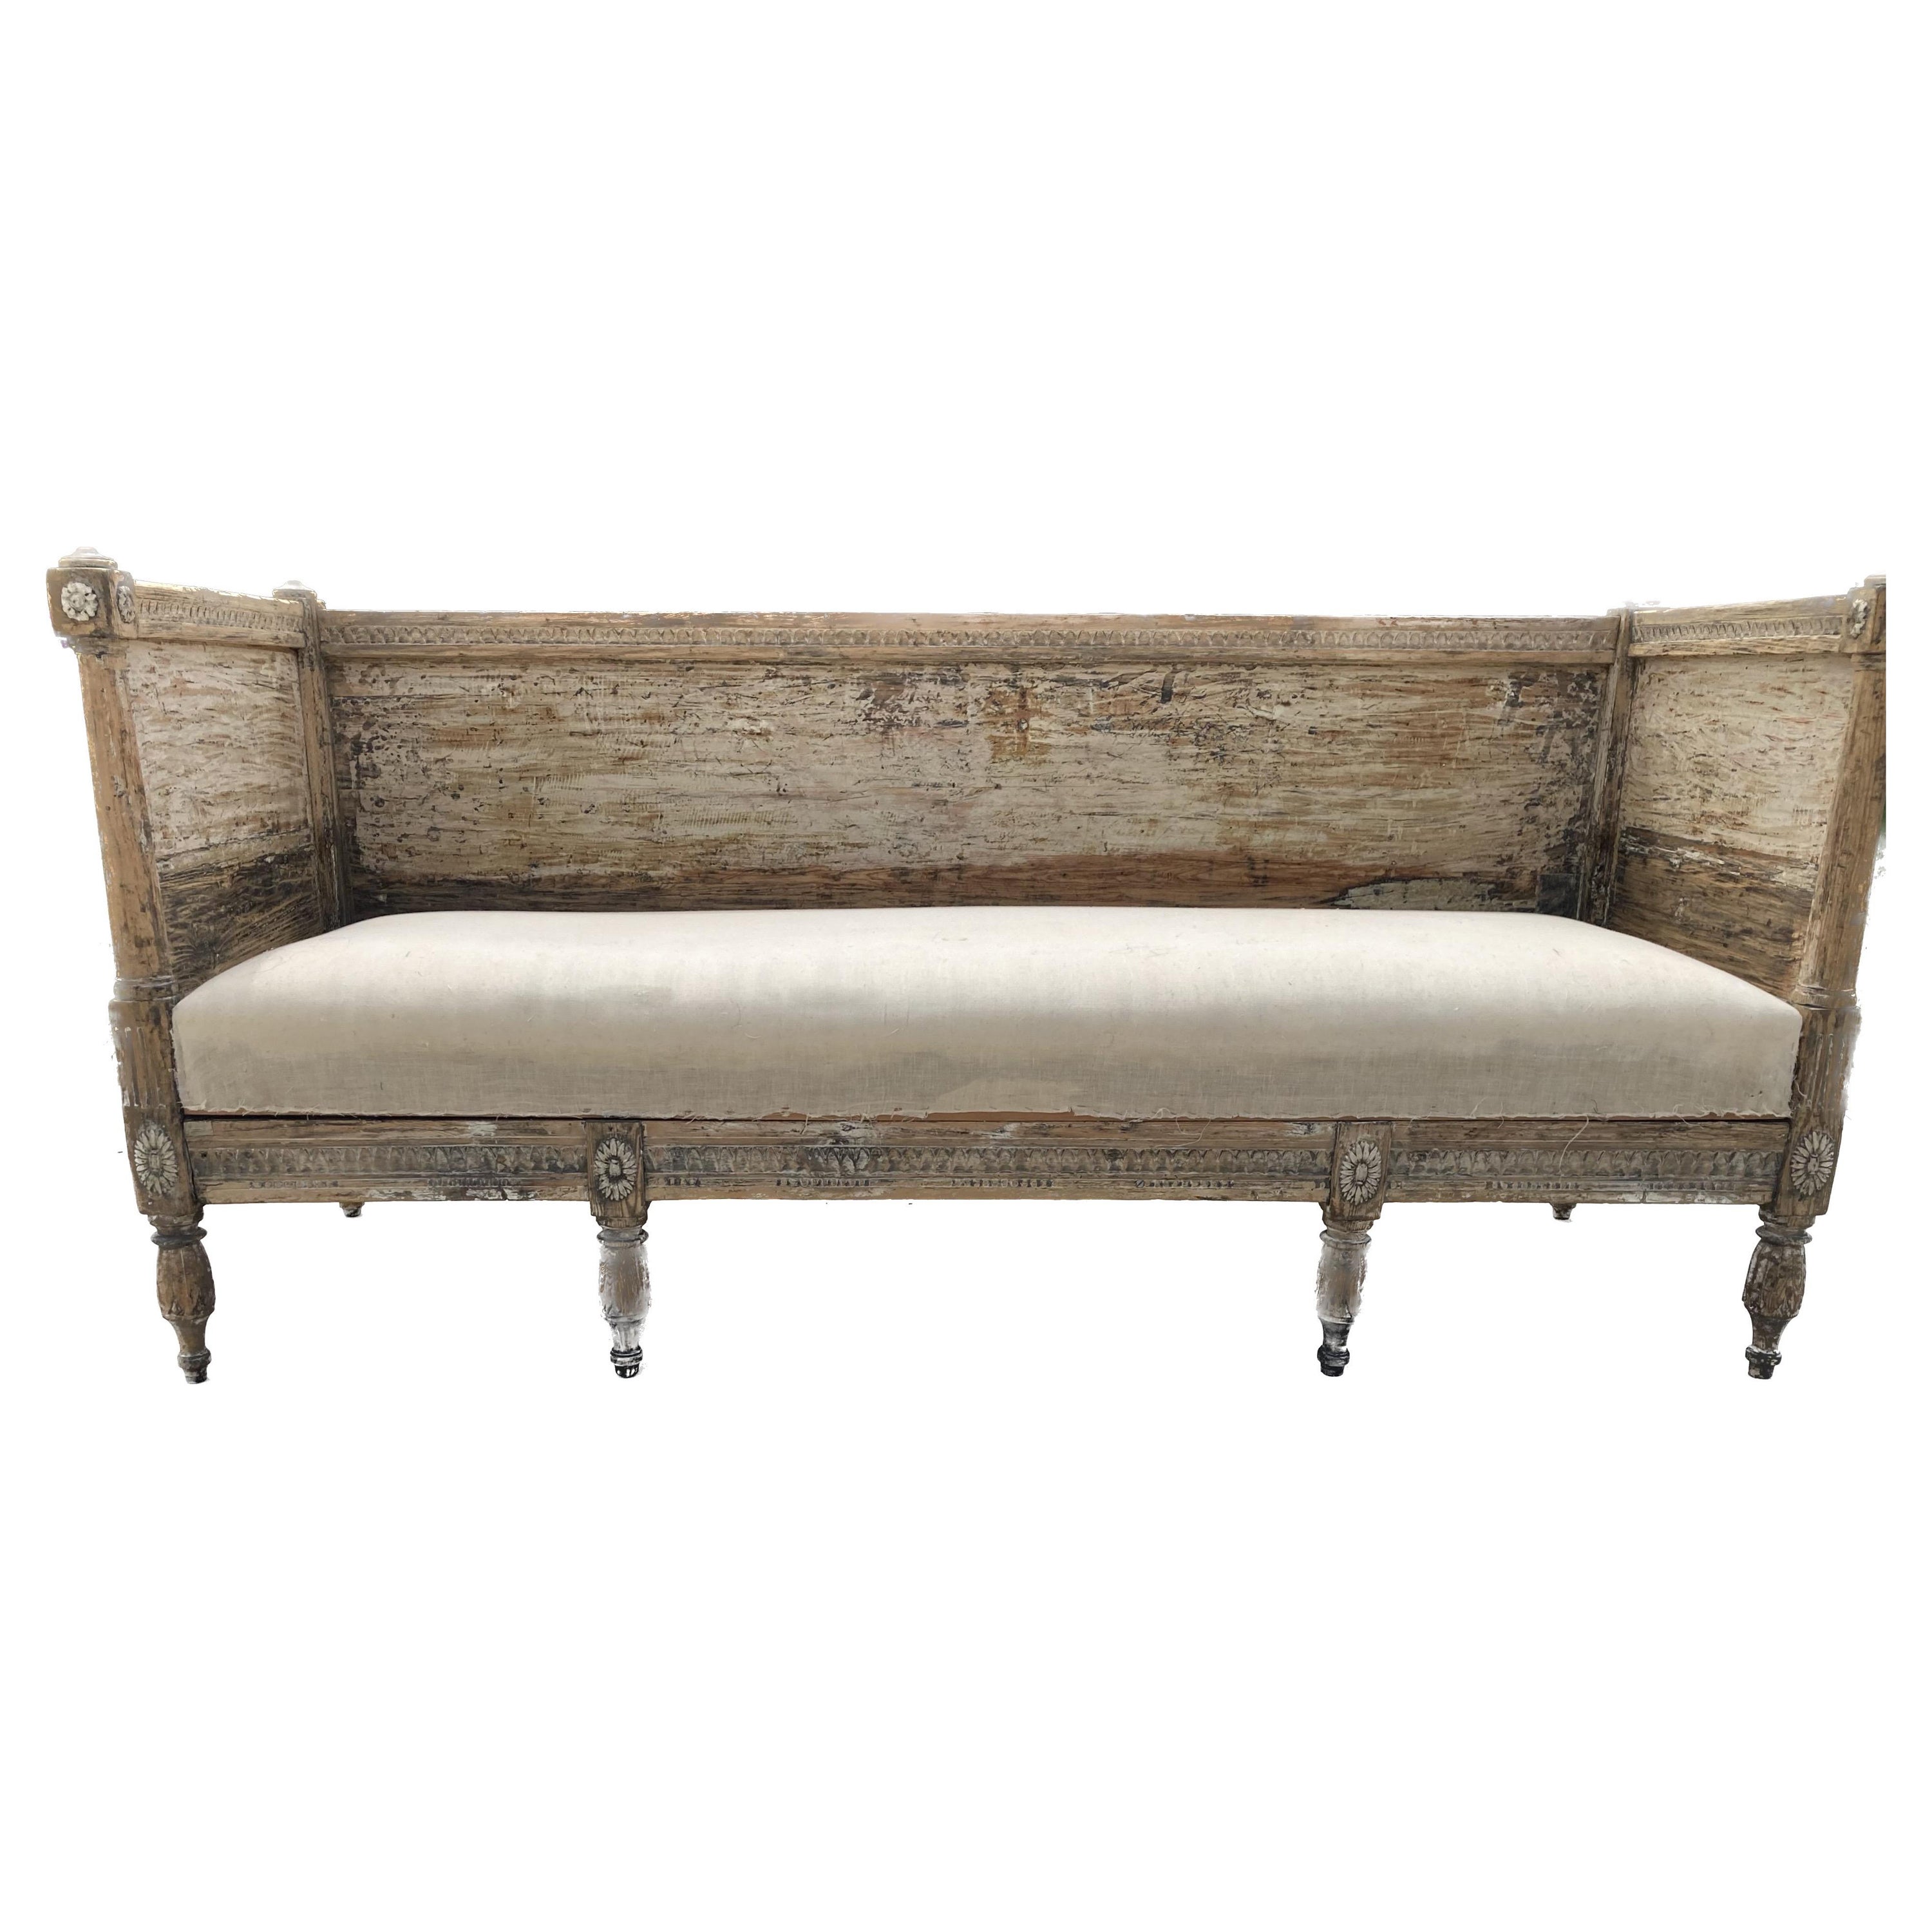 Swedish 18th Century Painted Carved Gustavian Sofa Bench